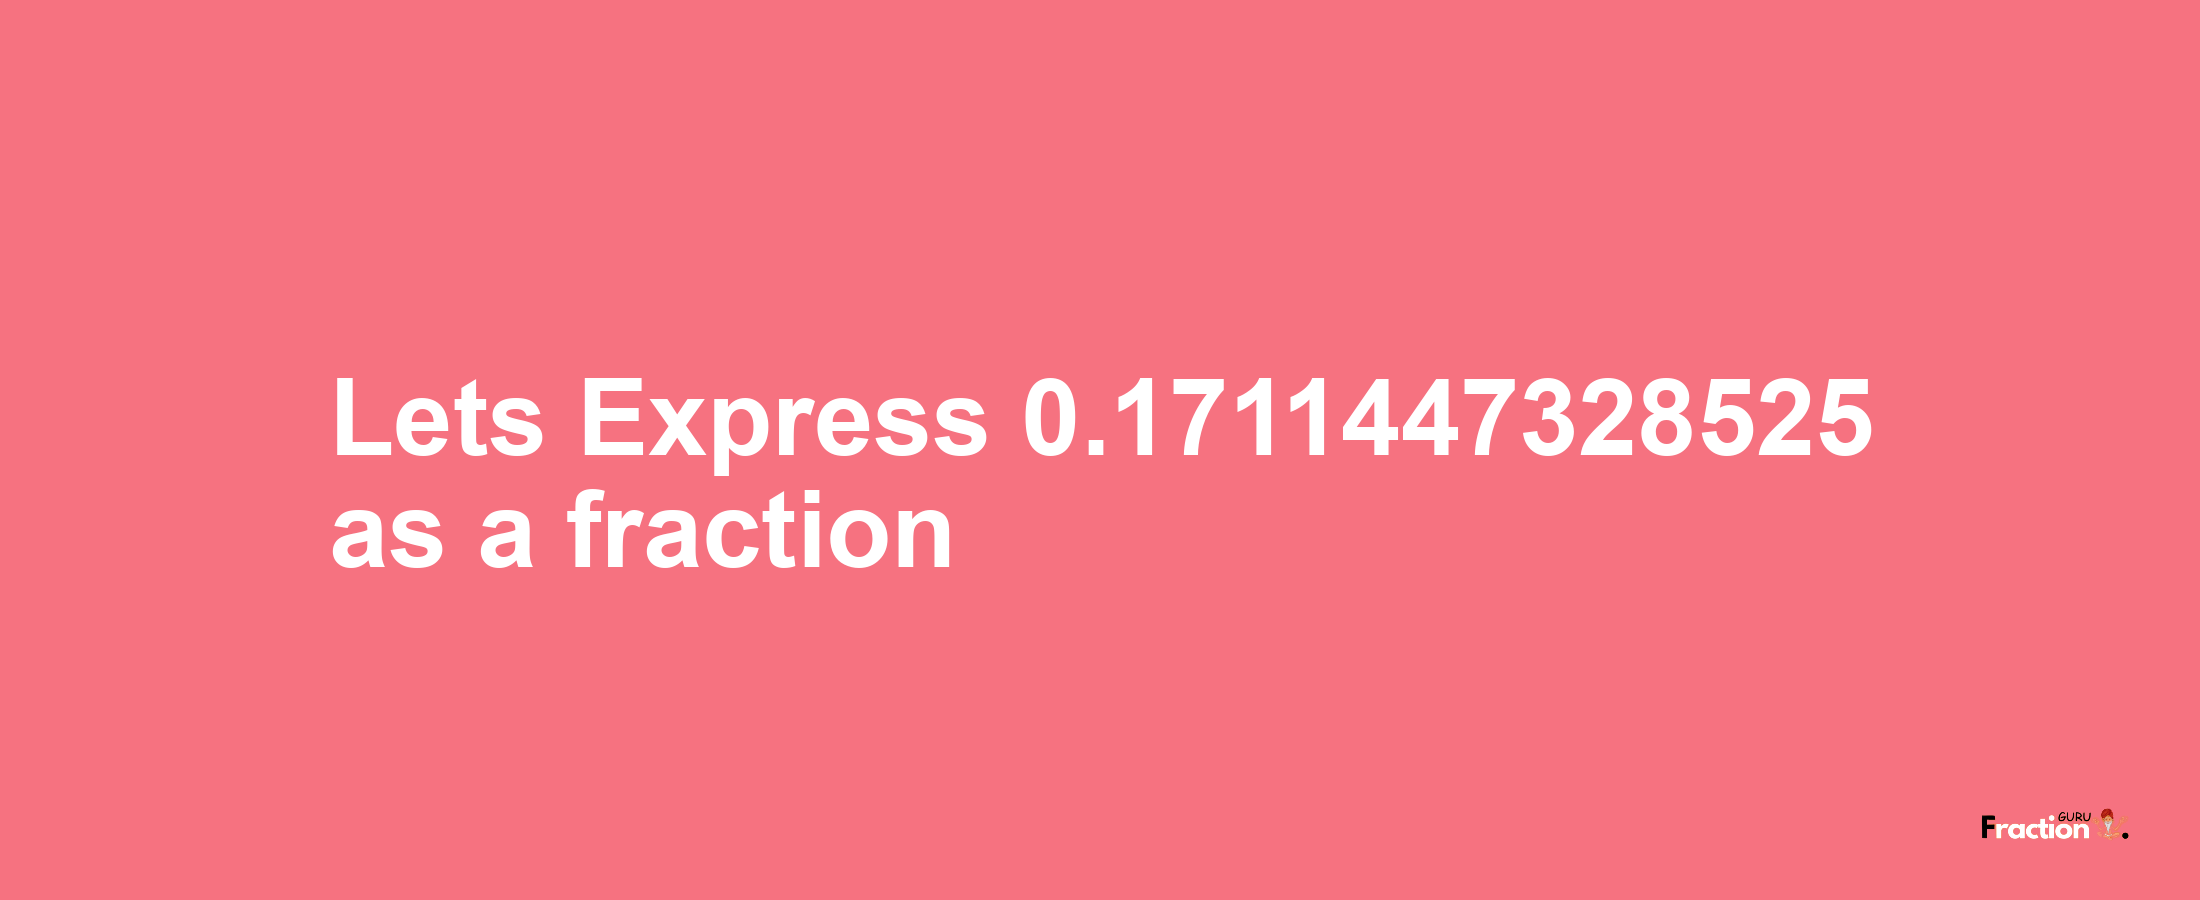 Lets Express 0.1711447328525 as afraction